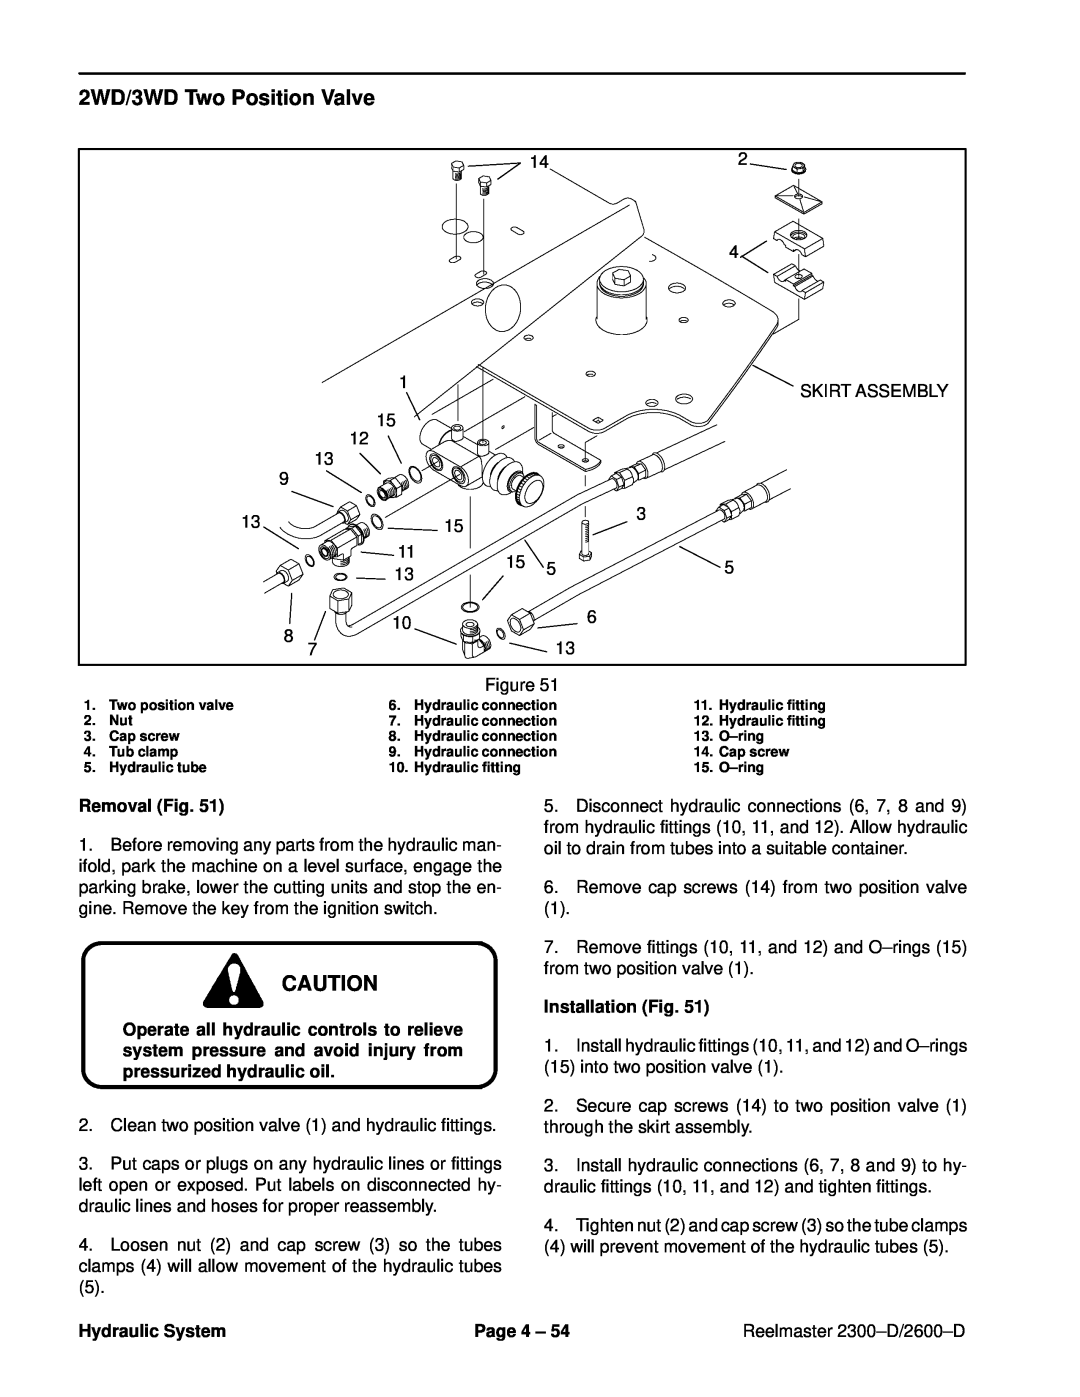 Toro 2300-D, 2600D 2WD/3WD Two Position Valve, Skirt Assembly, Removal Fig, Installation Fig, Hydraulic System, Page 4 ± 